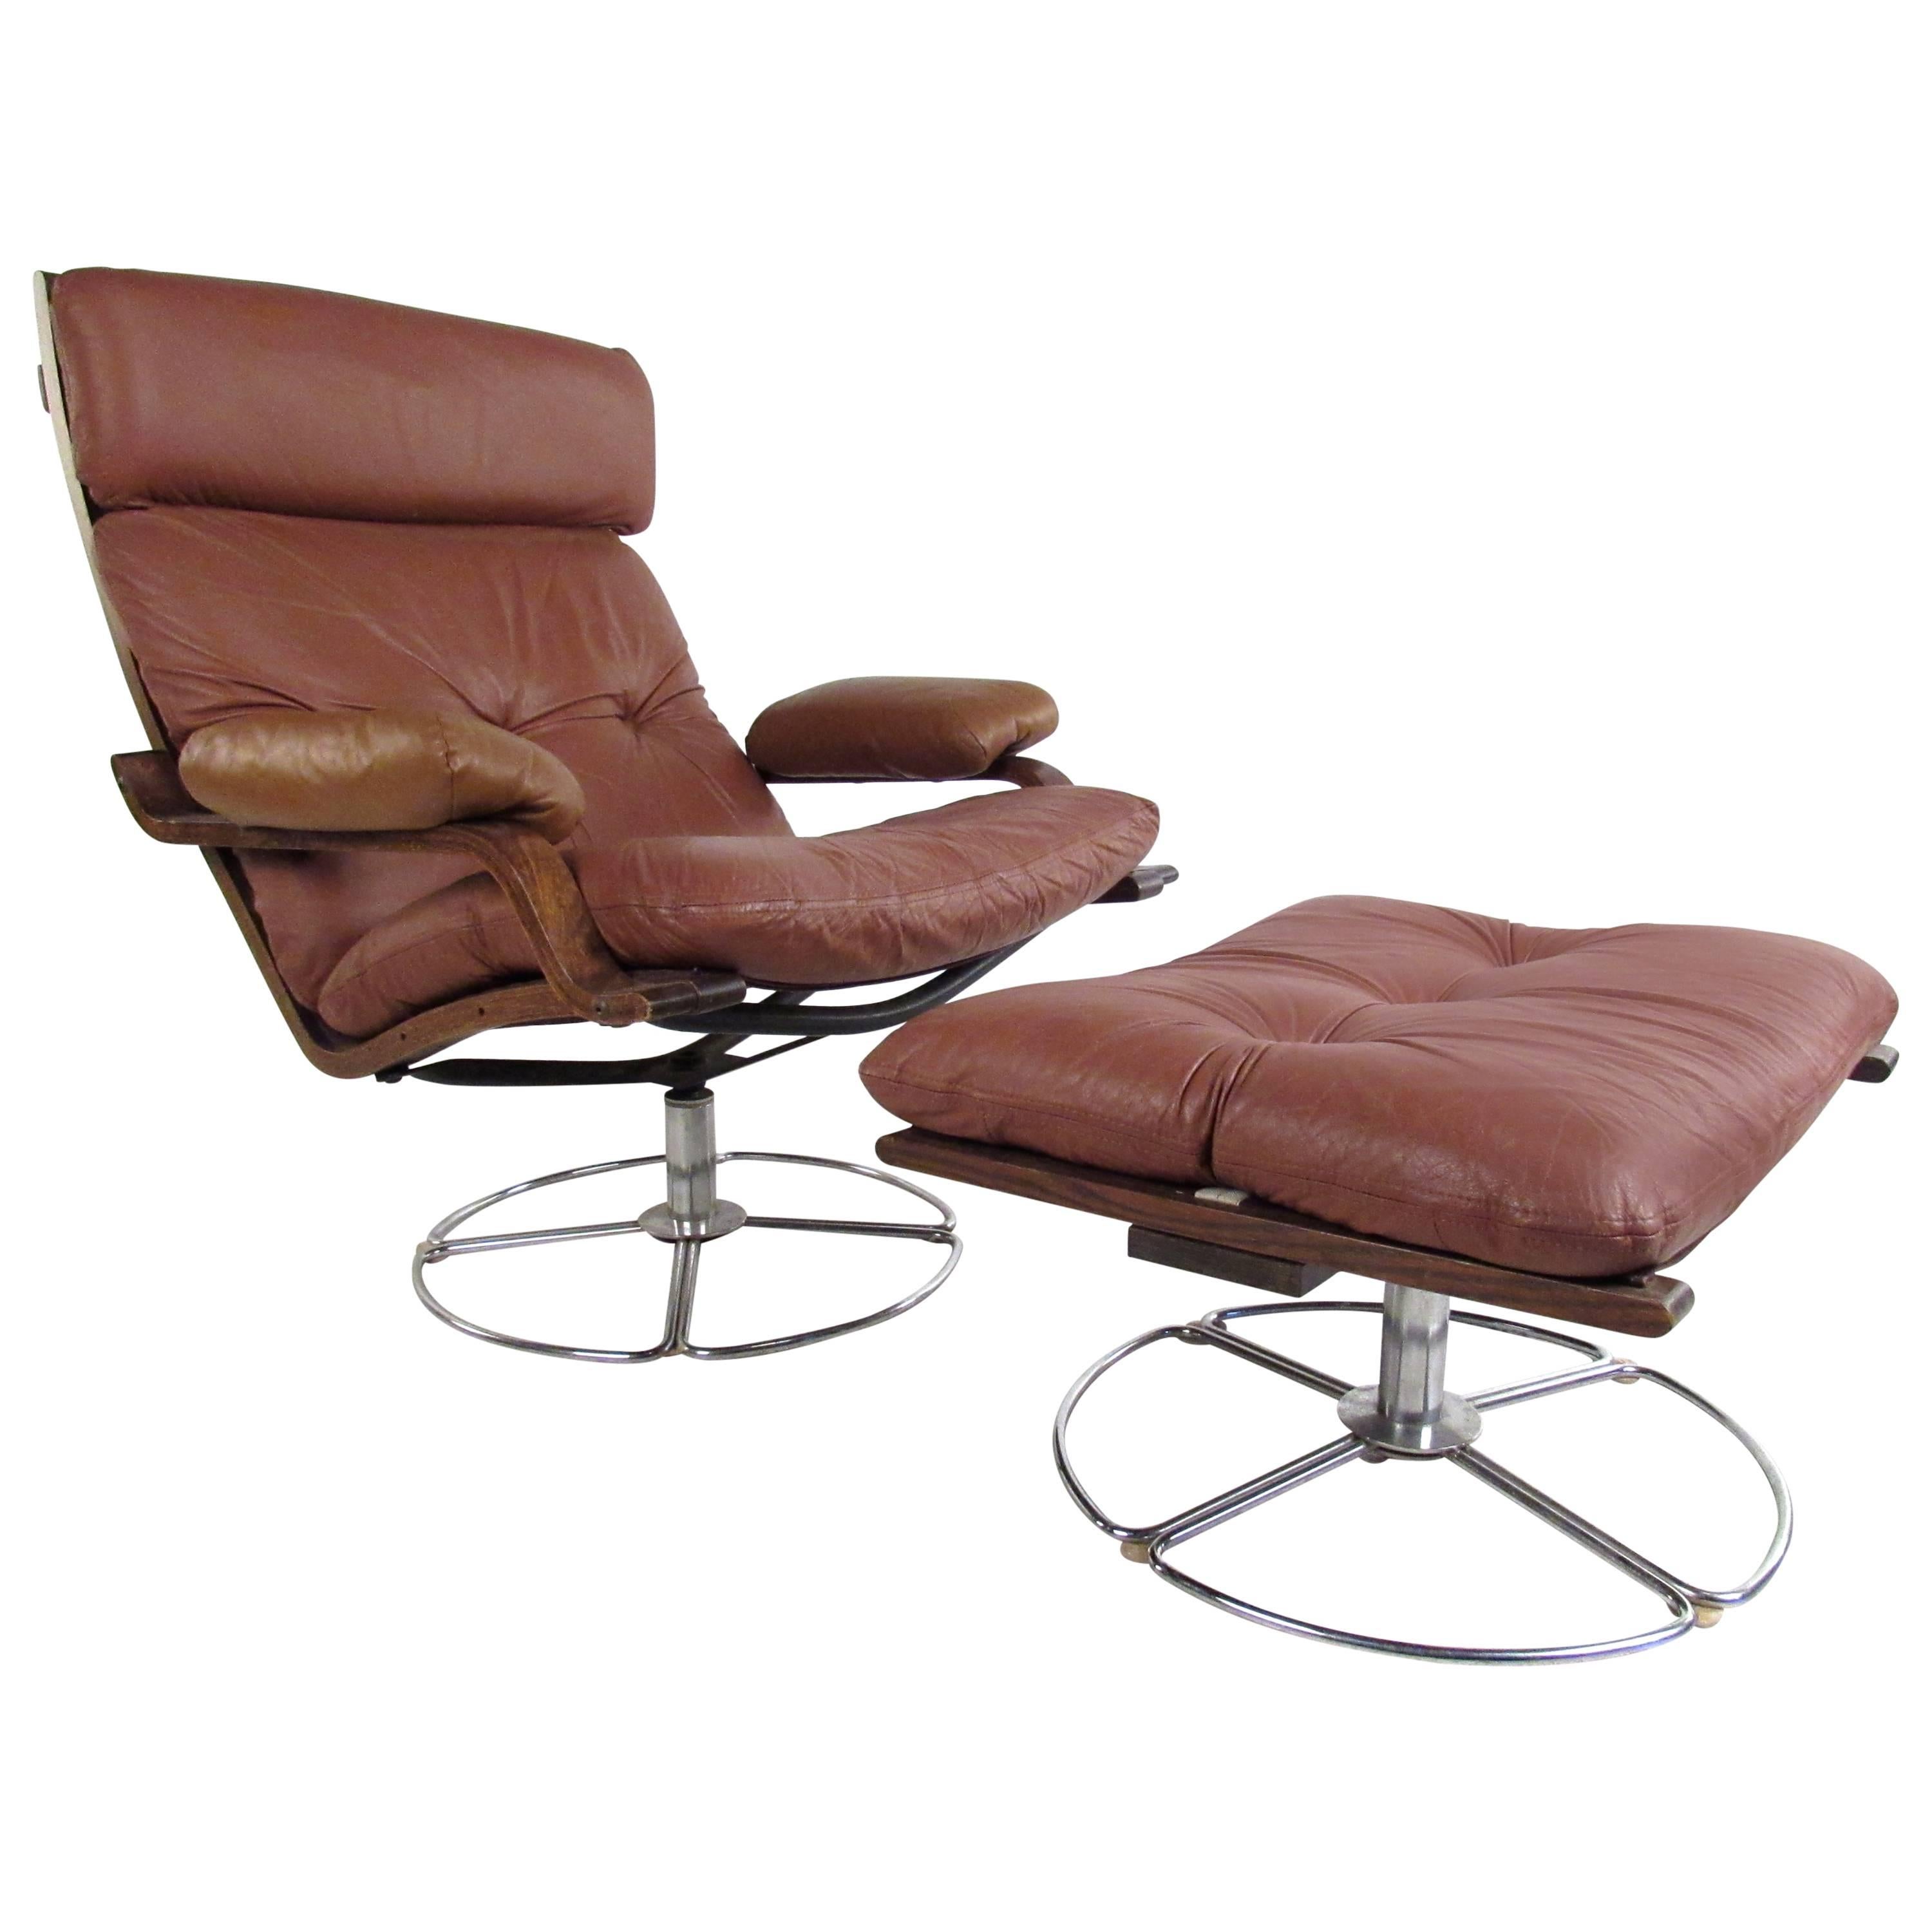 Vintage Leather Westnofa Style Swivel Lounge Chair with Ottoman